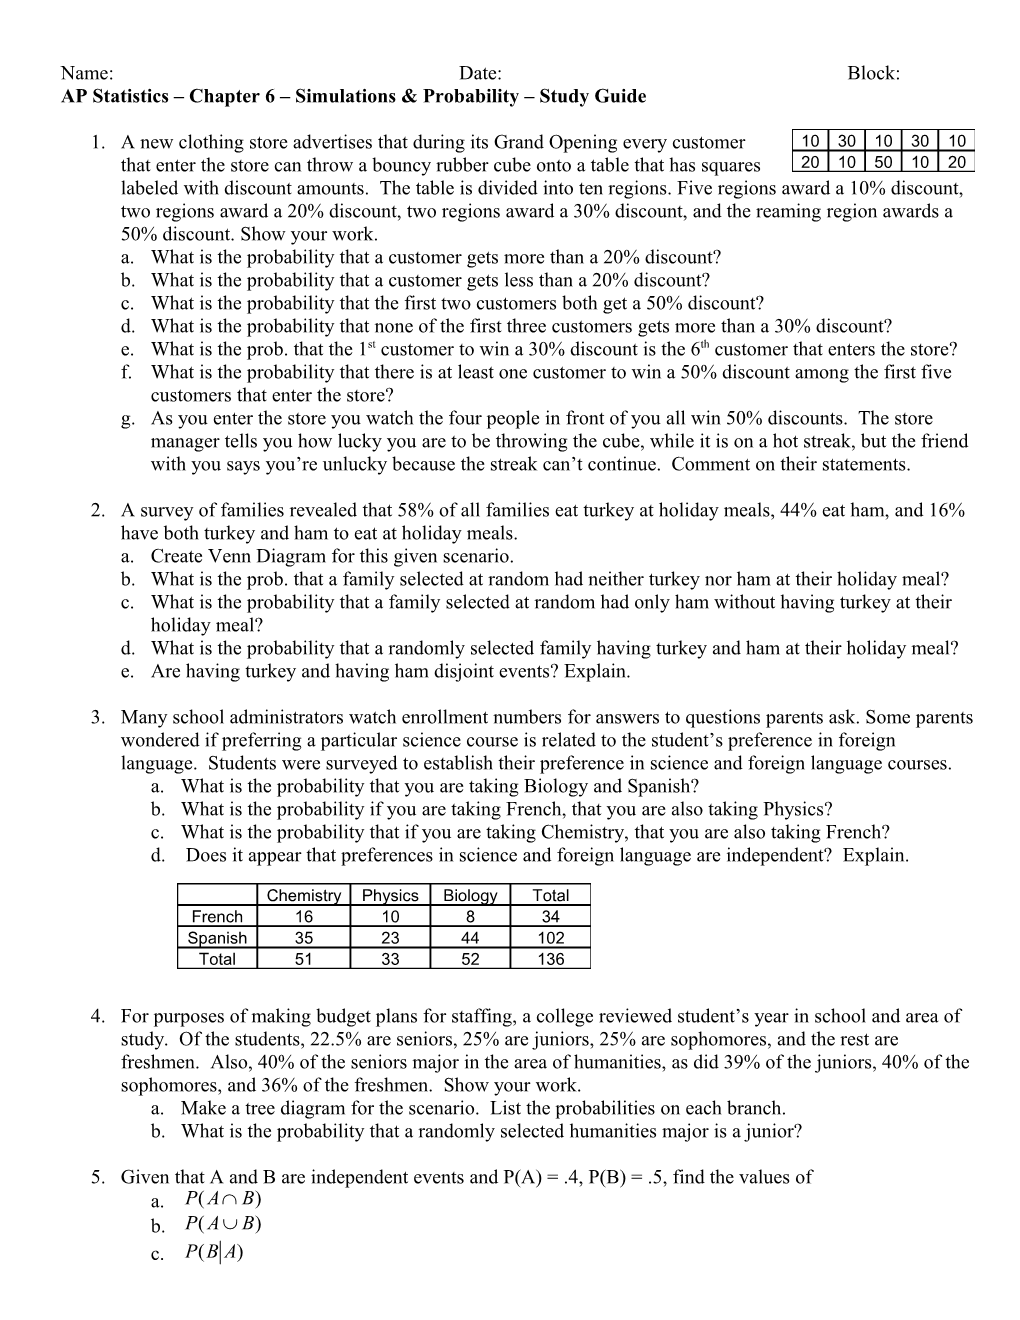 AP Statistics Chapter 6 Simulations & Probability Study Guide